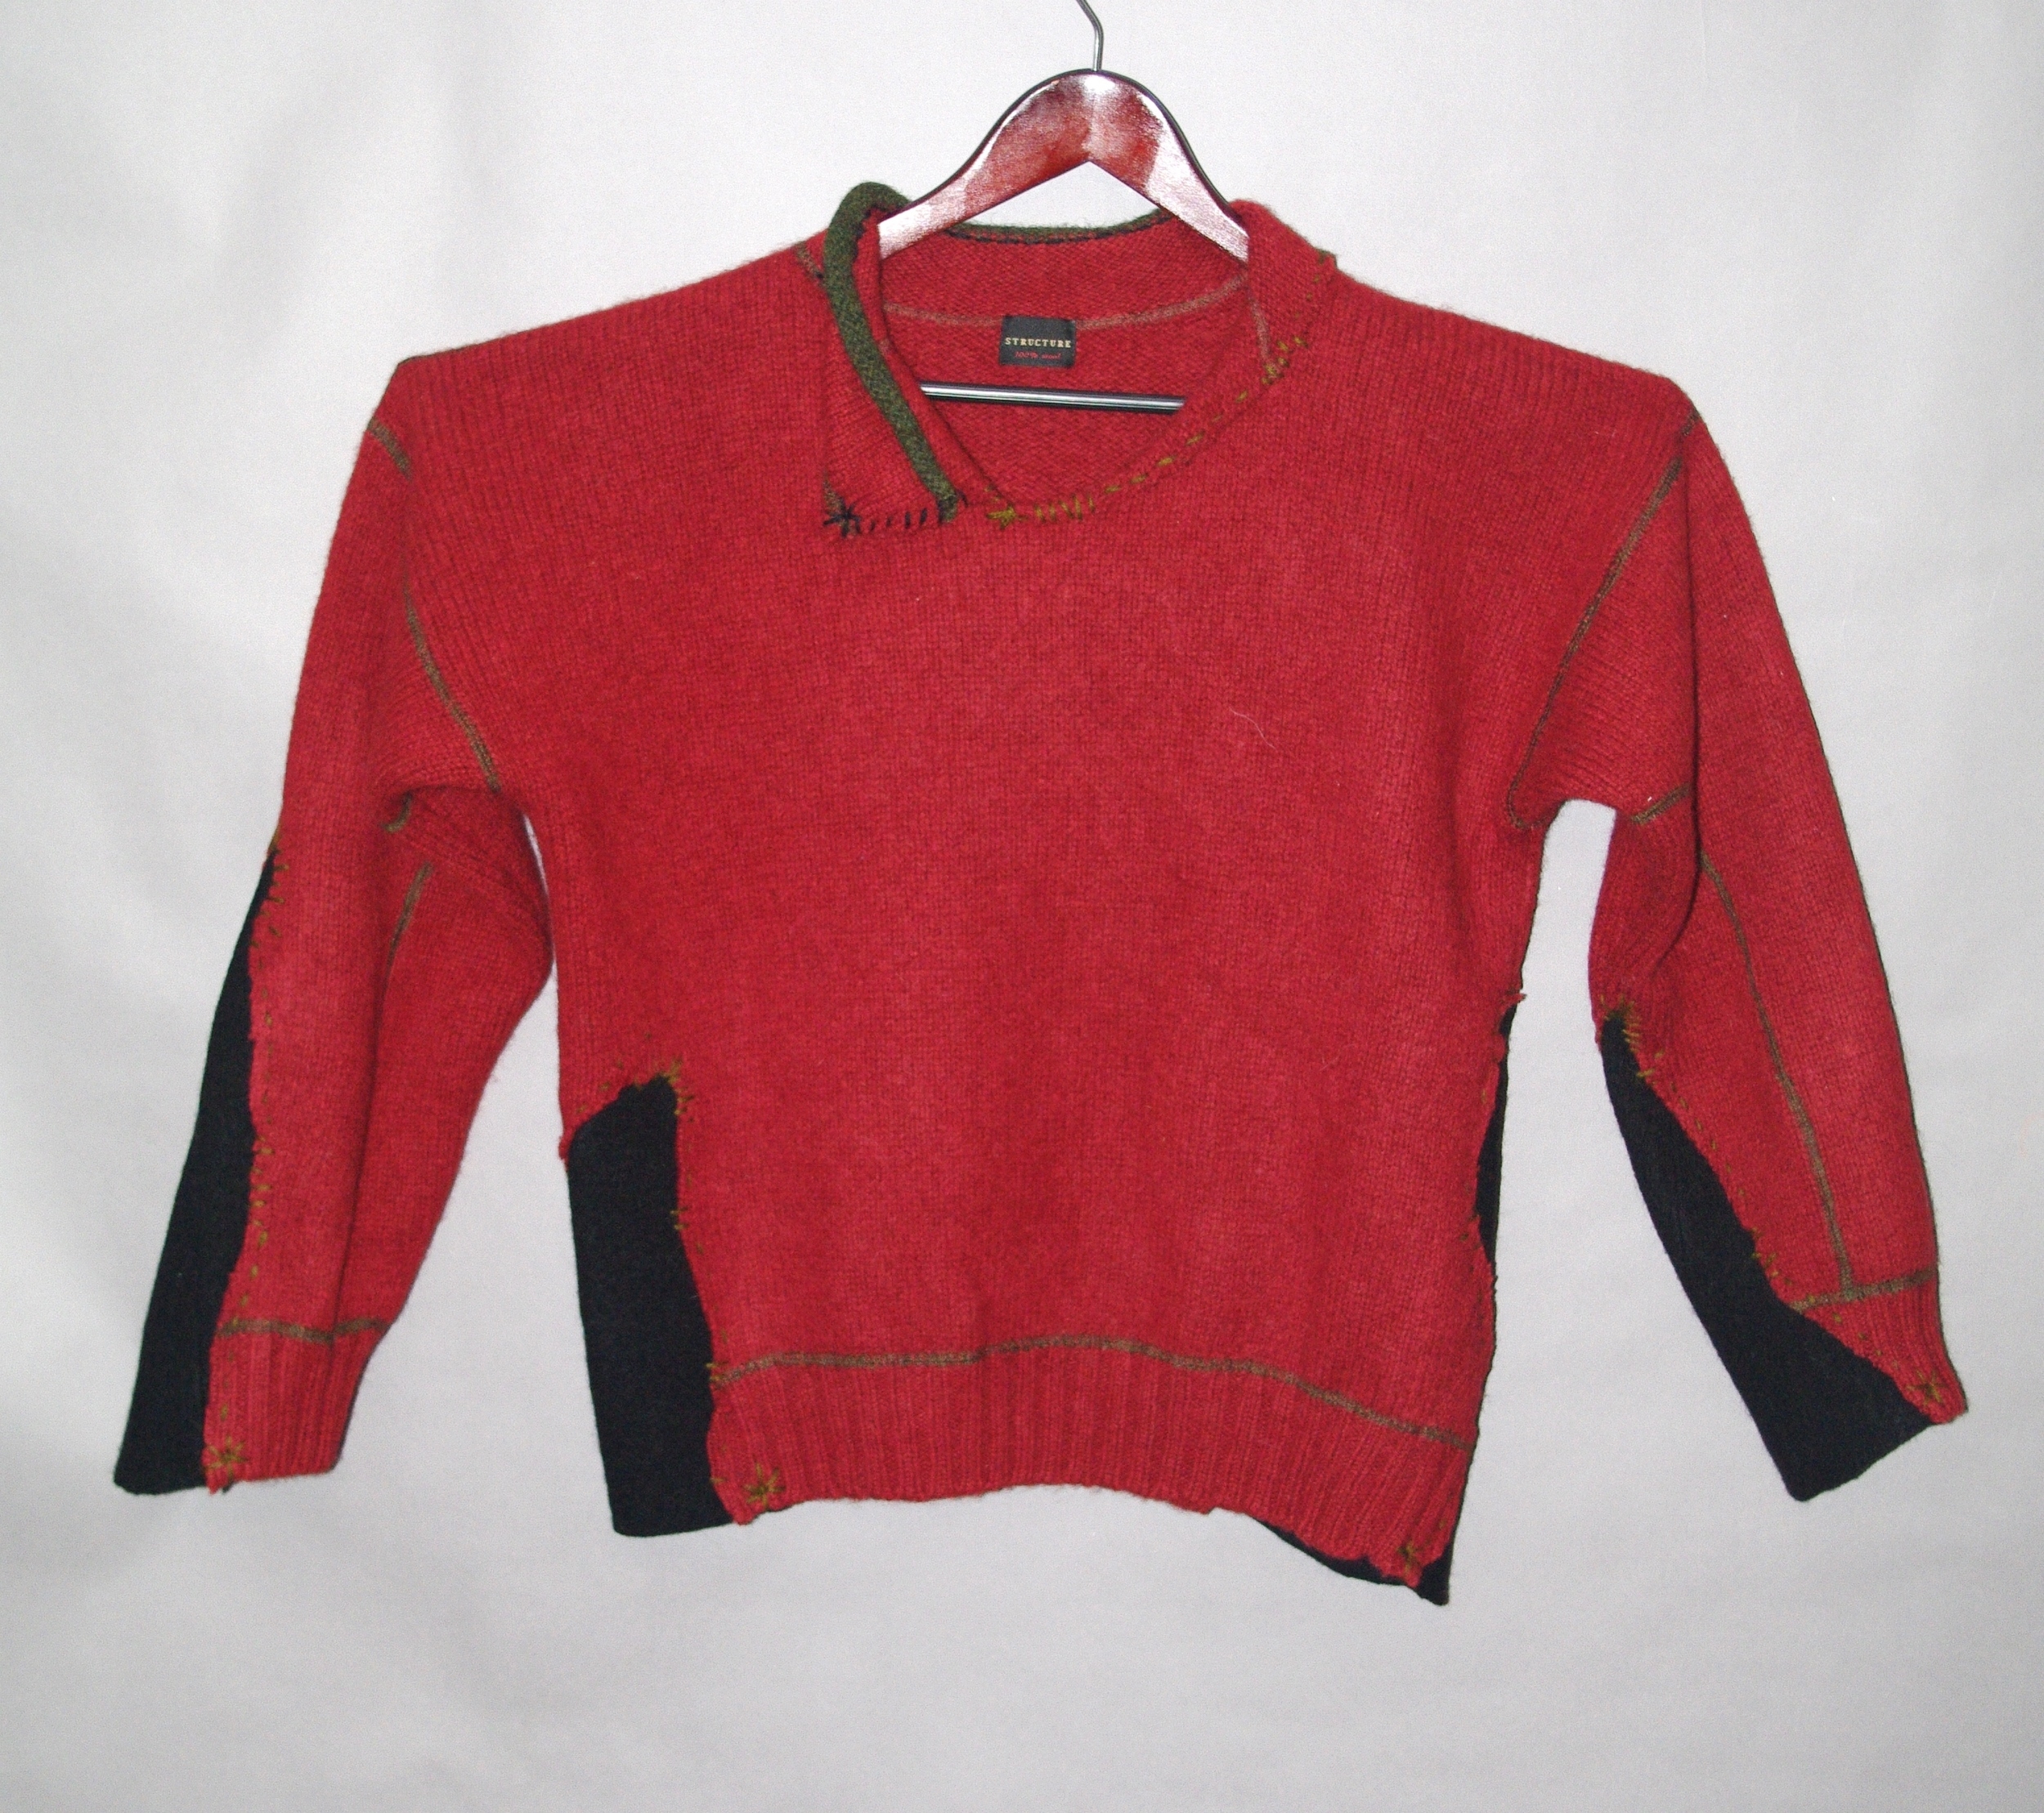 Upcycled, Wool Sweater